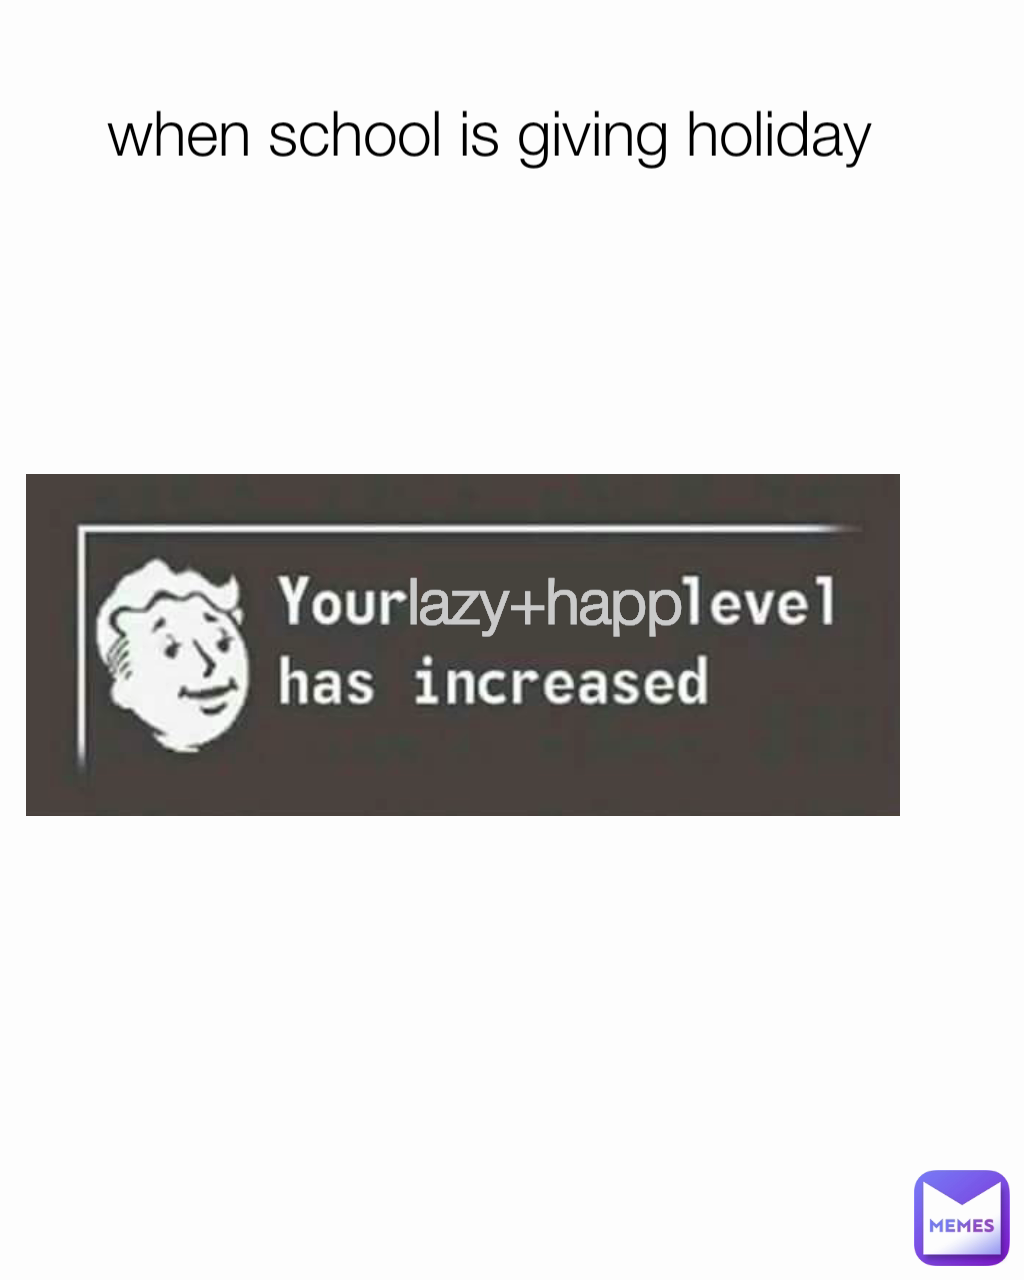 when school is giving holiday  lazy+happ